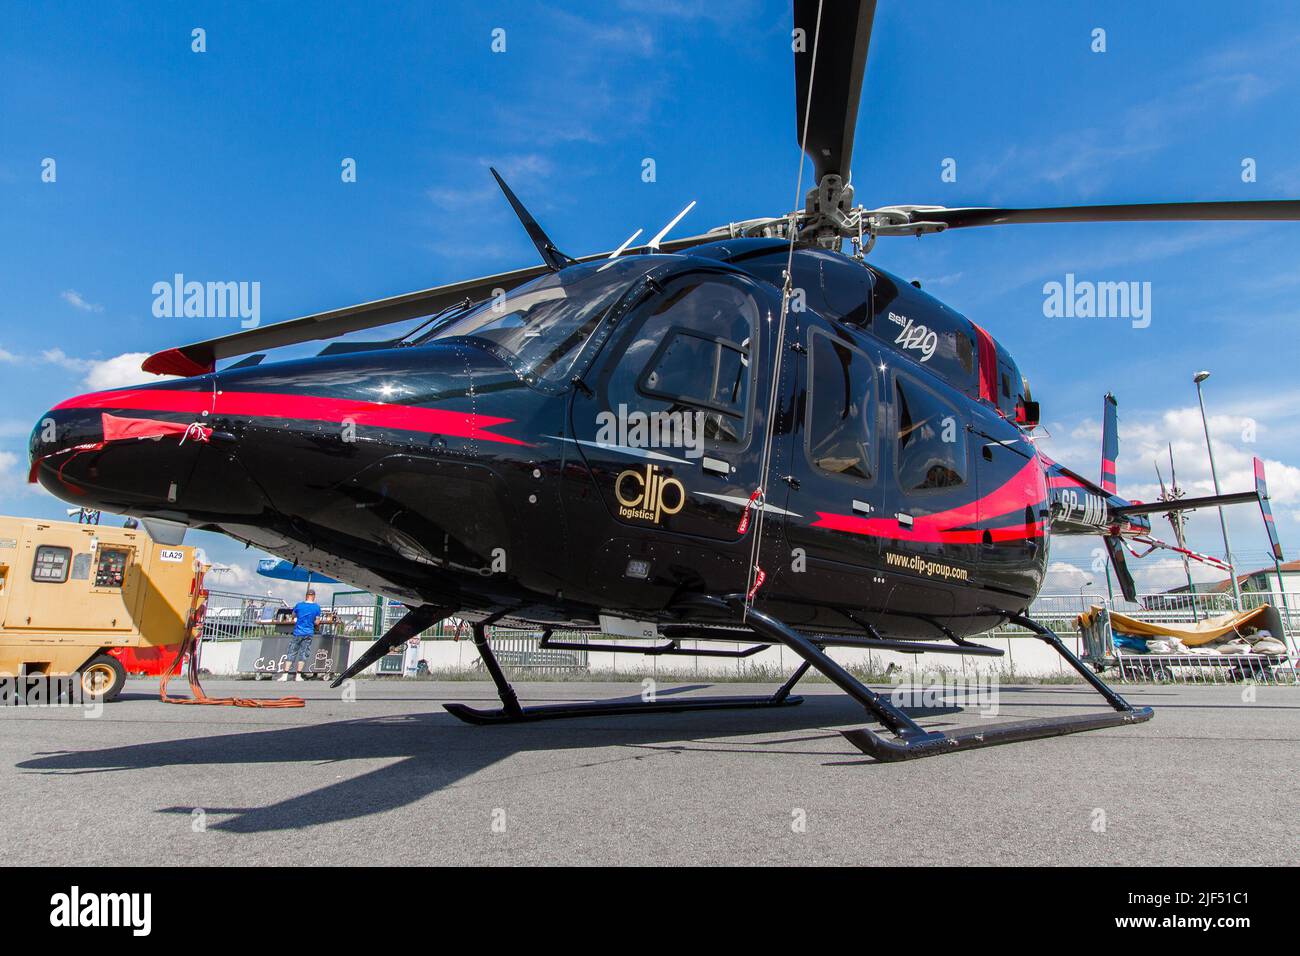 Brand new Bell 429 helicopter sitting on the apron at the exhibition in Berlin Stock Photo